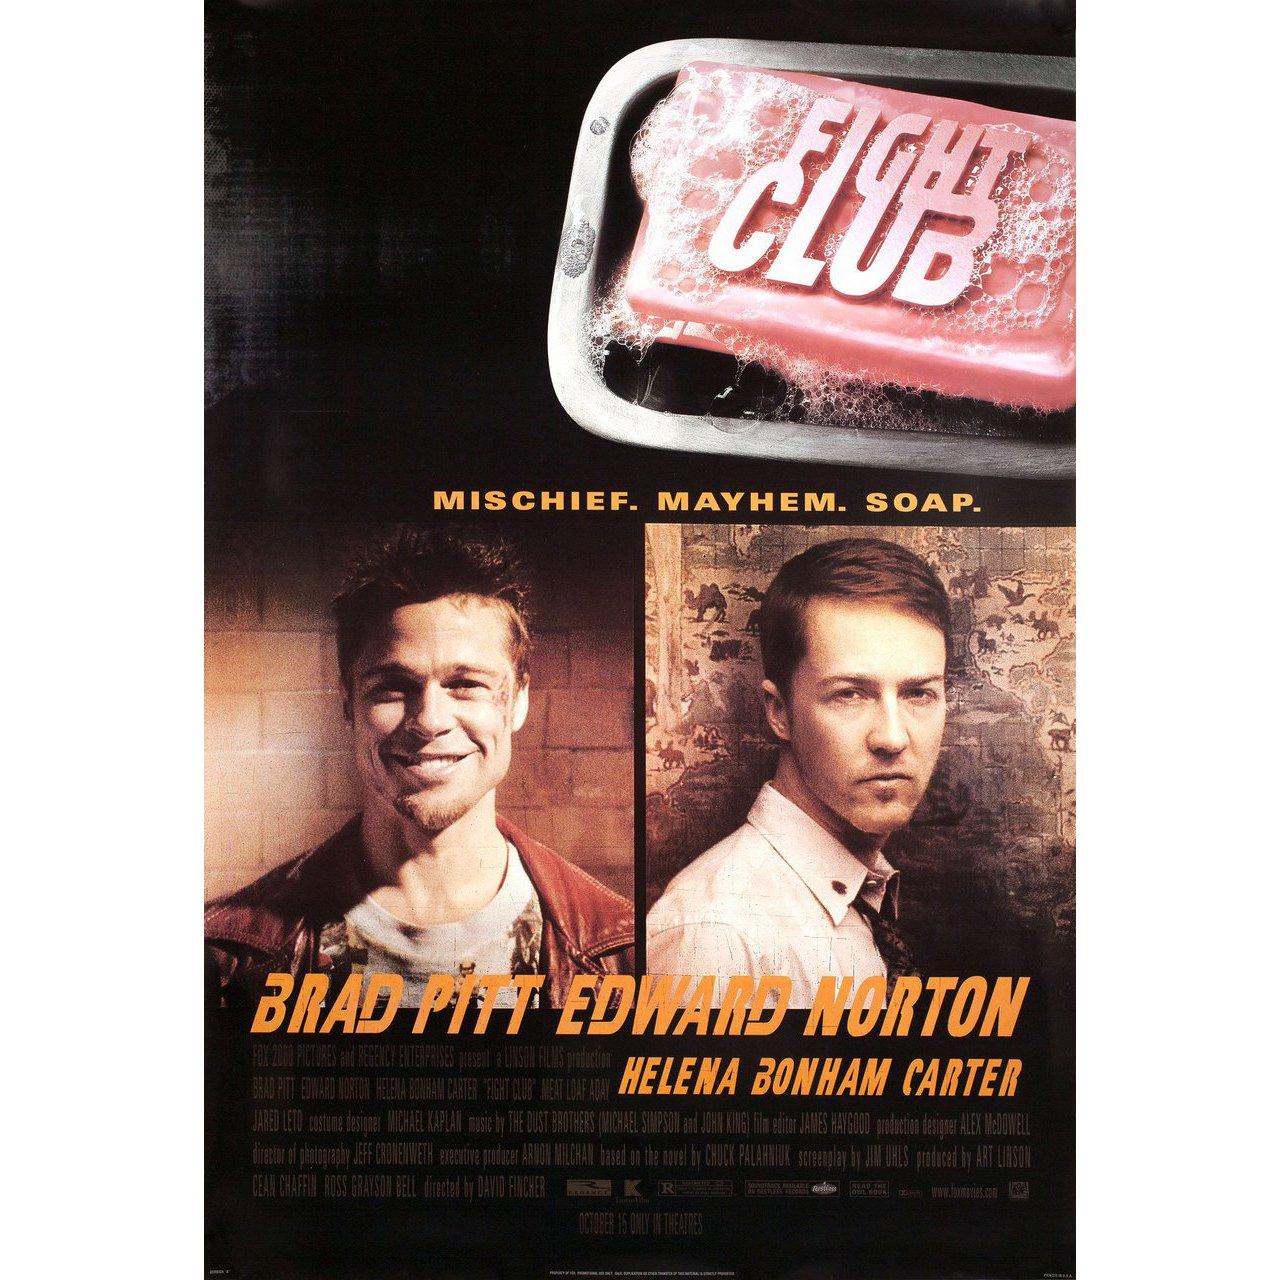 Original 1999 U.S. one sheet poster for the film 'Fight Club' directed by David Fincher with Edward Norton / Brad Pitt / Helena Bonham Carter / Meat Loaf. Very good-fine condition, rolled. Please note: the size is stated in inches and the actual